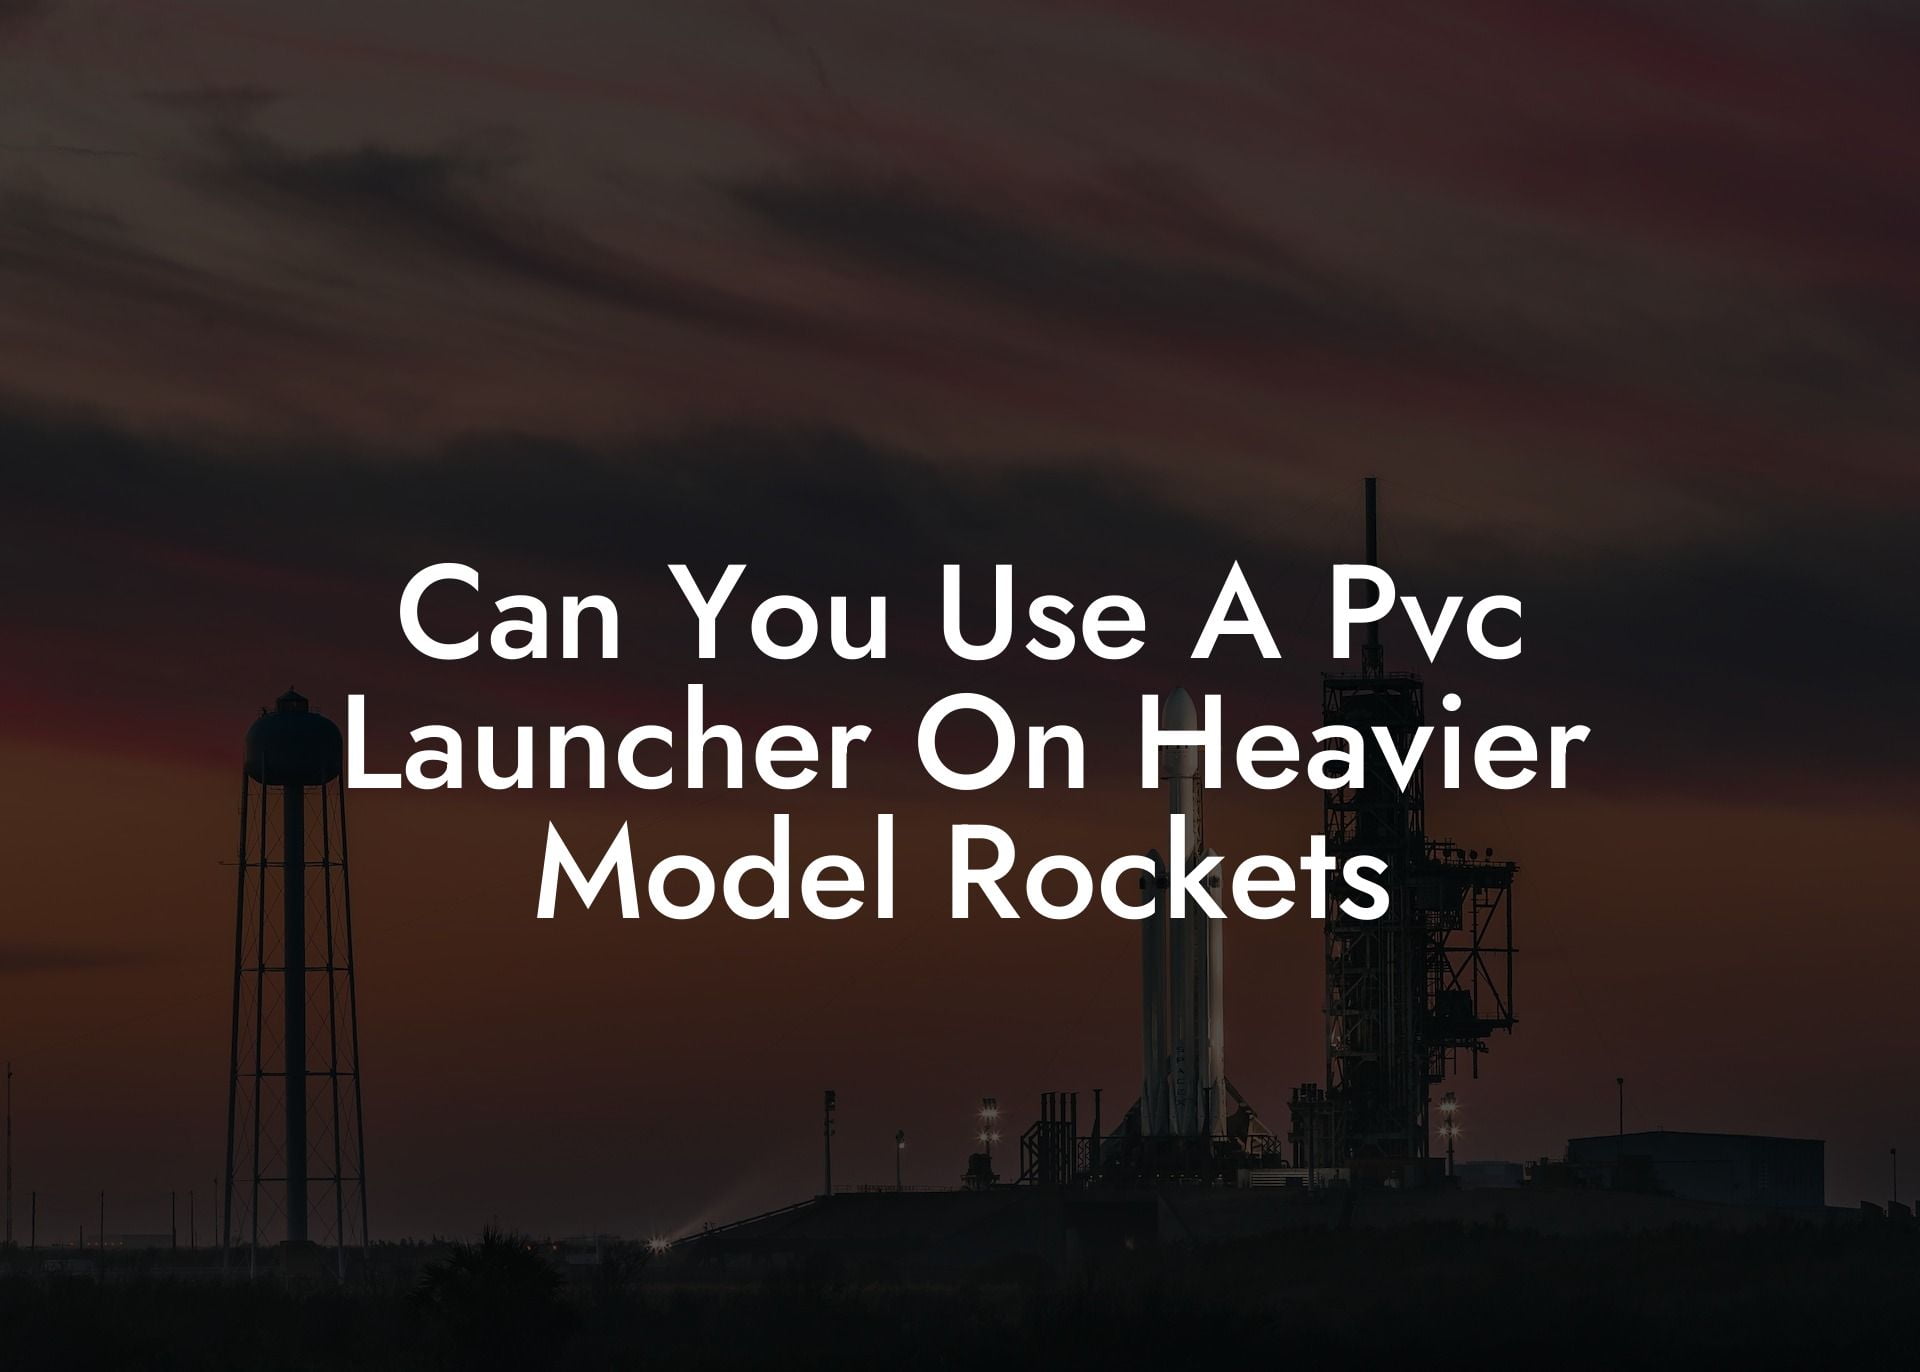 Can You Use A Pvc Launcher On Heavier Model Rockets